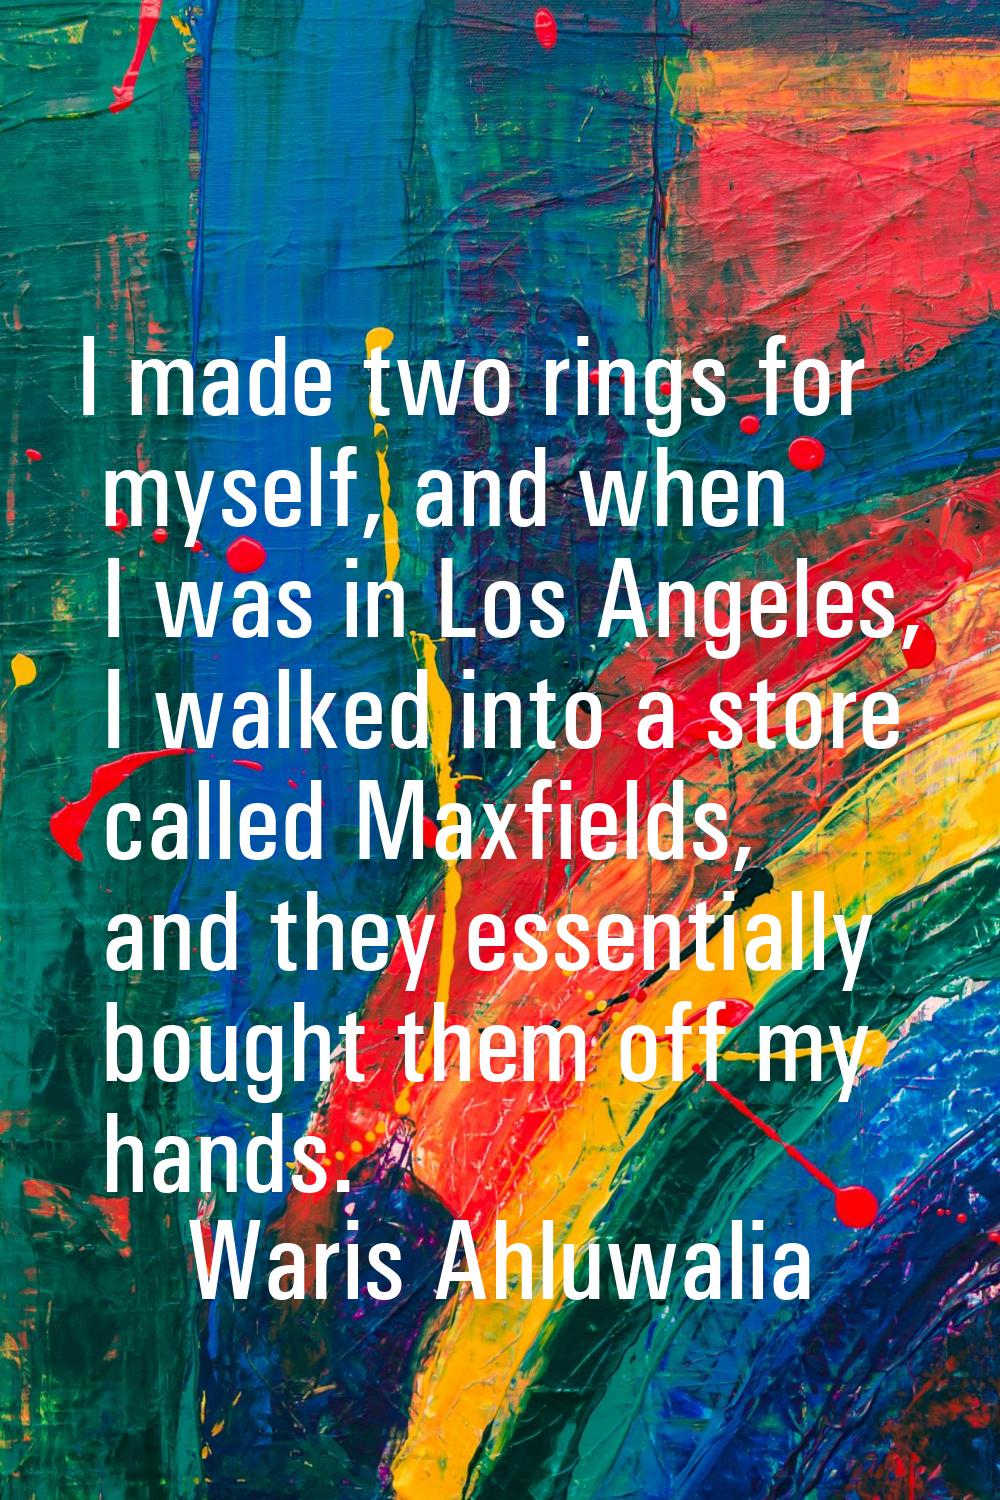 I made two rings for myself, and when I was in Los Angeles, I walked into a store called Maxfields,